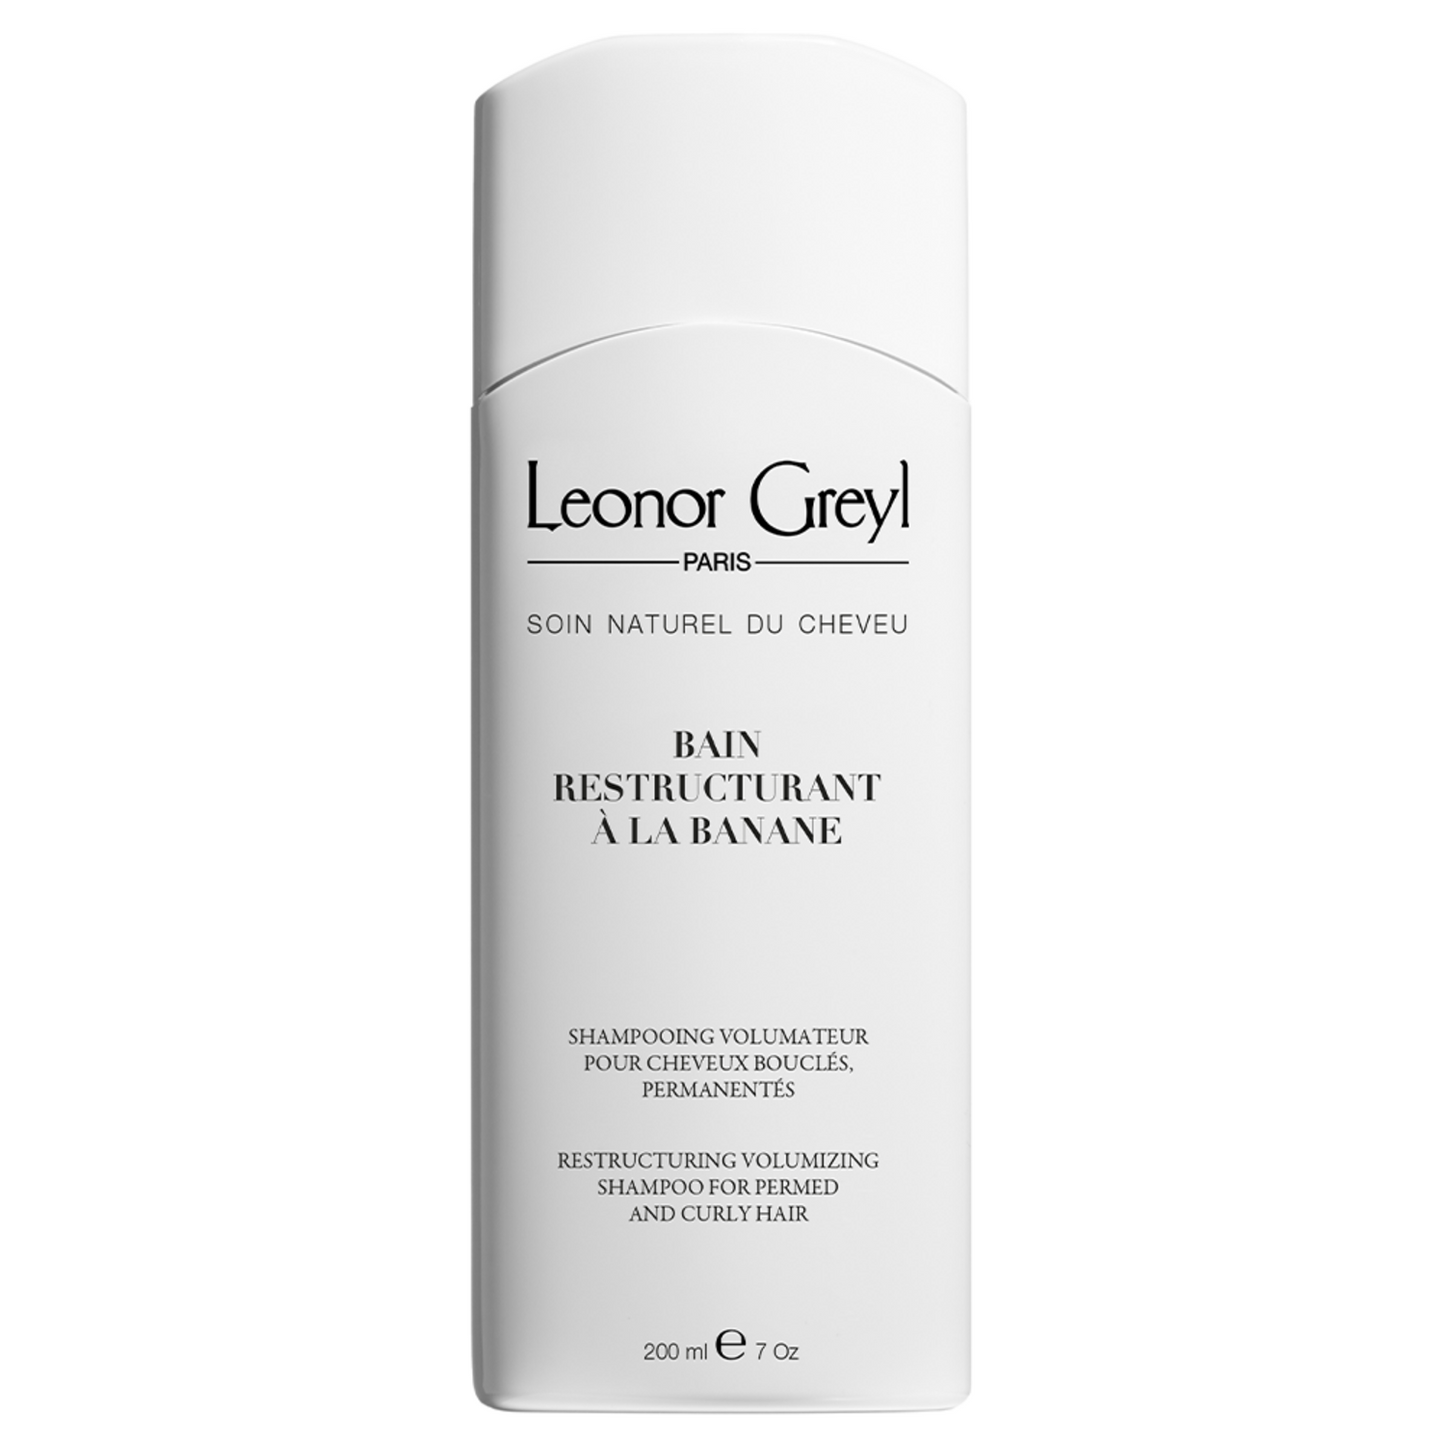 Leonor Greyl Bain Restructurant a la Banane Shampoo for Permed and Curly Hair